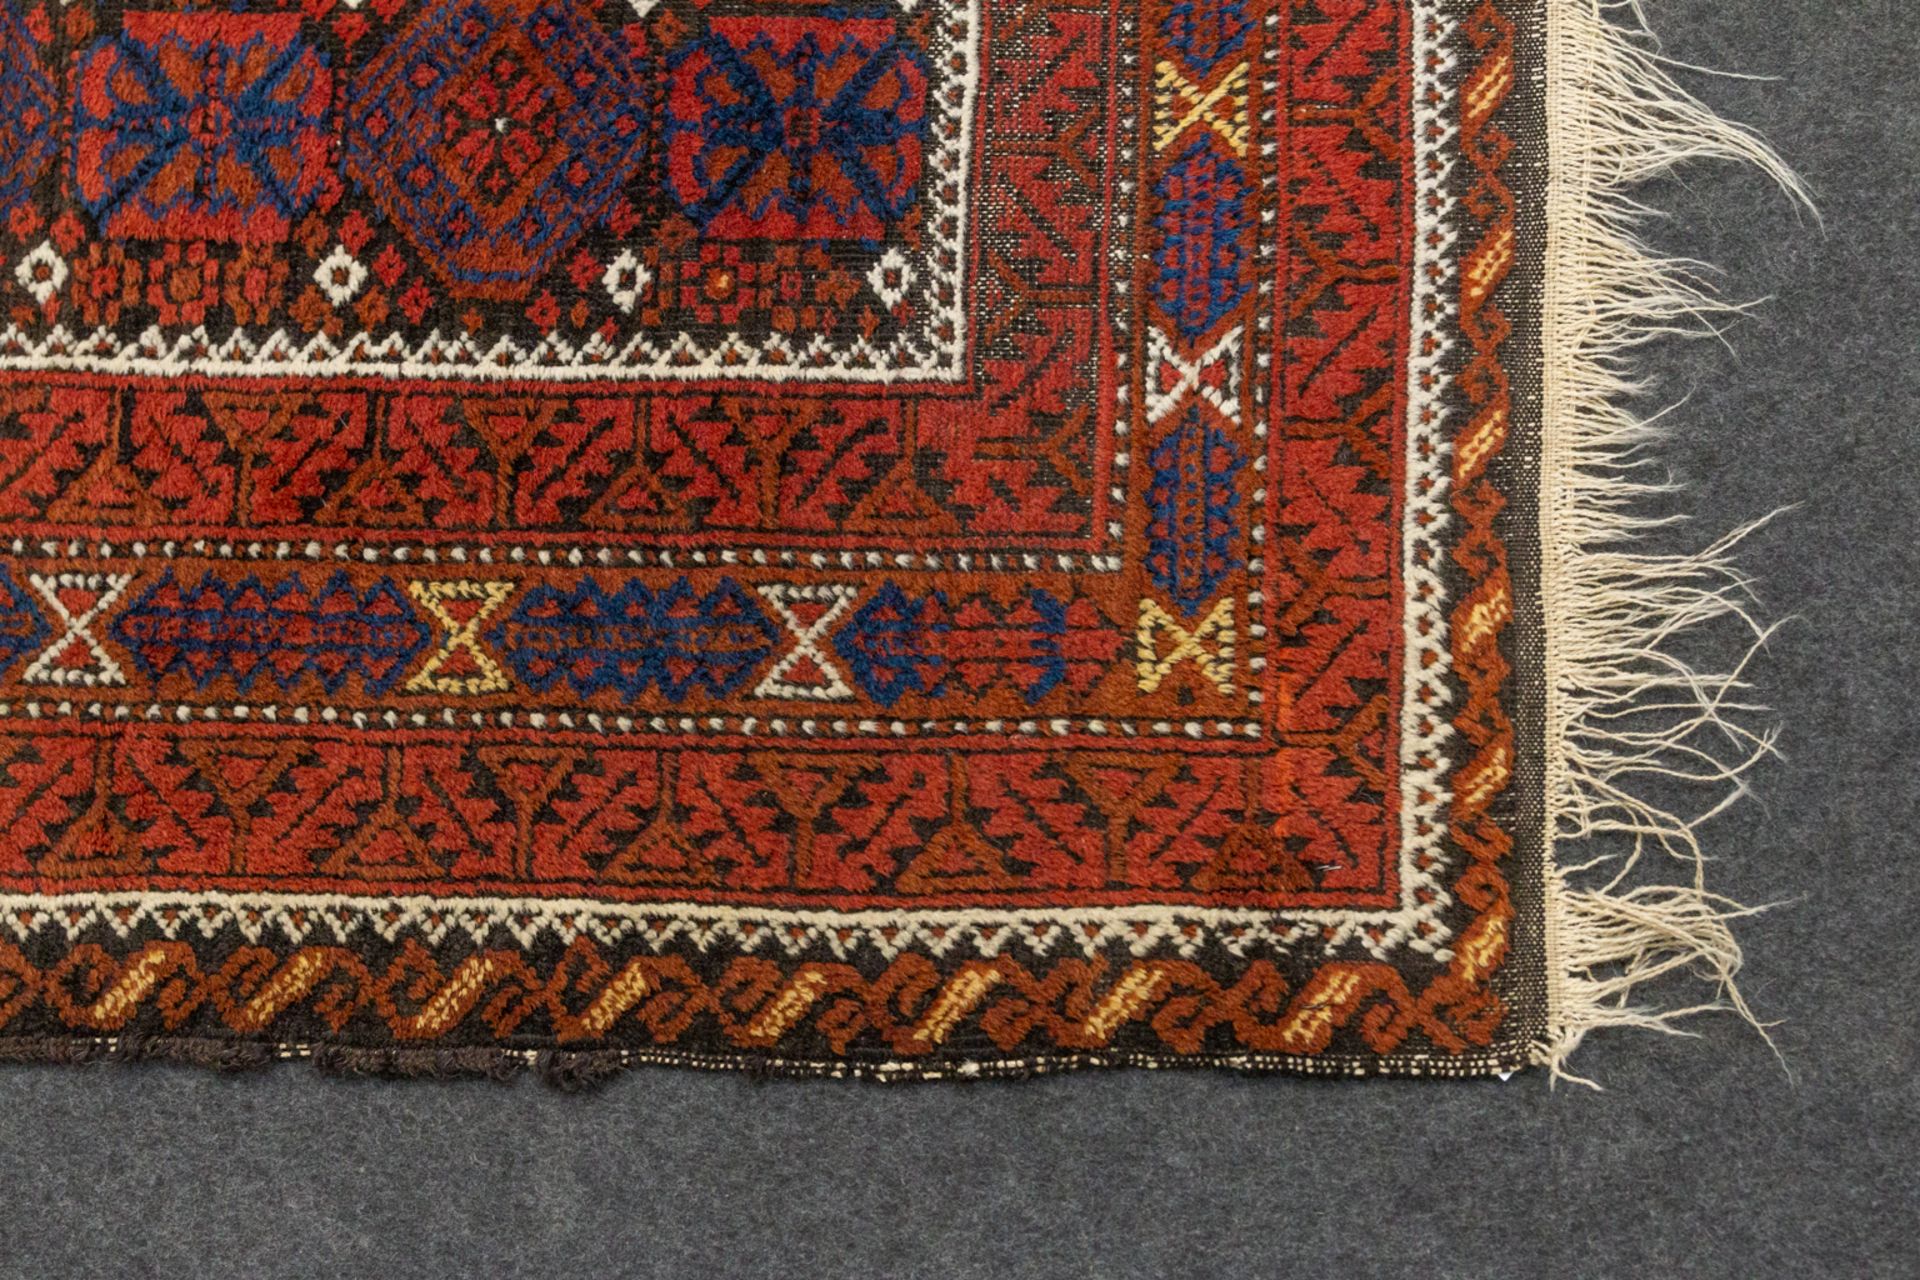 An Eastern hand-made carpet. (114 x 195 cm). - Image 2 of 6